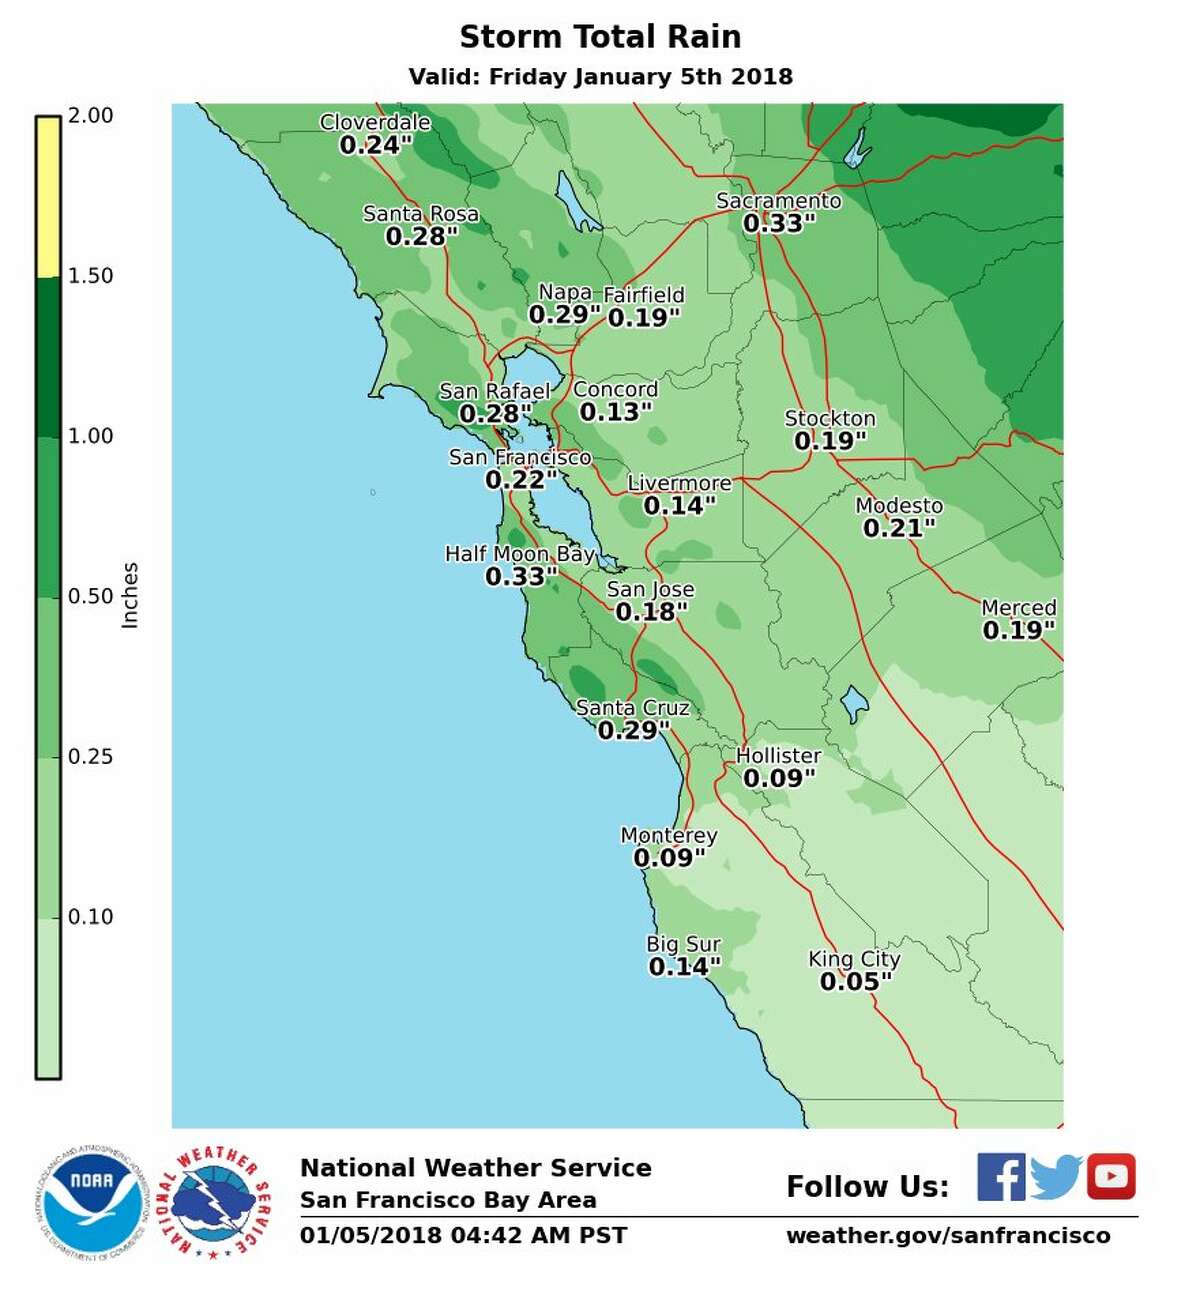 Stronger storm 50 MPH gusts, 4 inches of rain forecast for Bay Area ridges